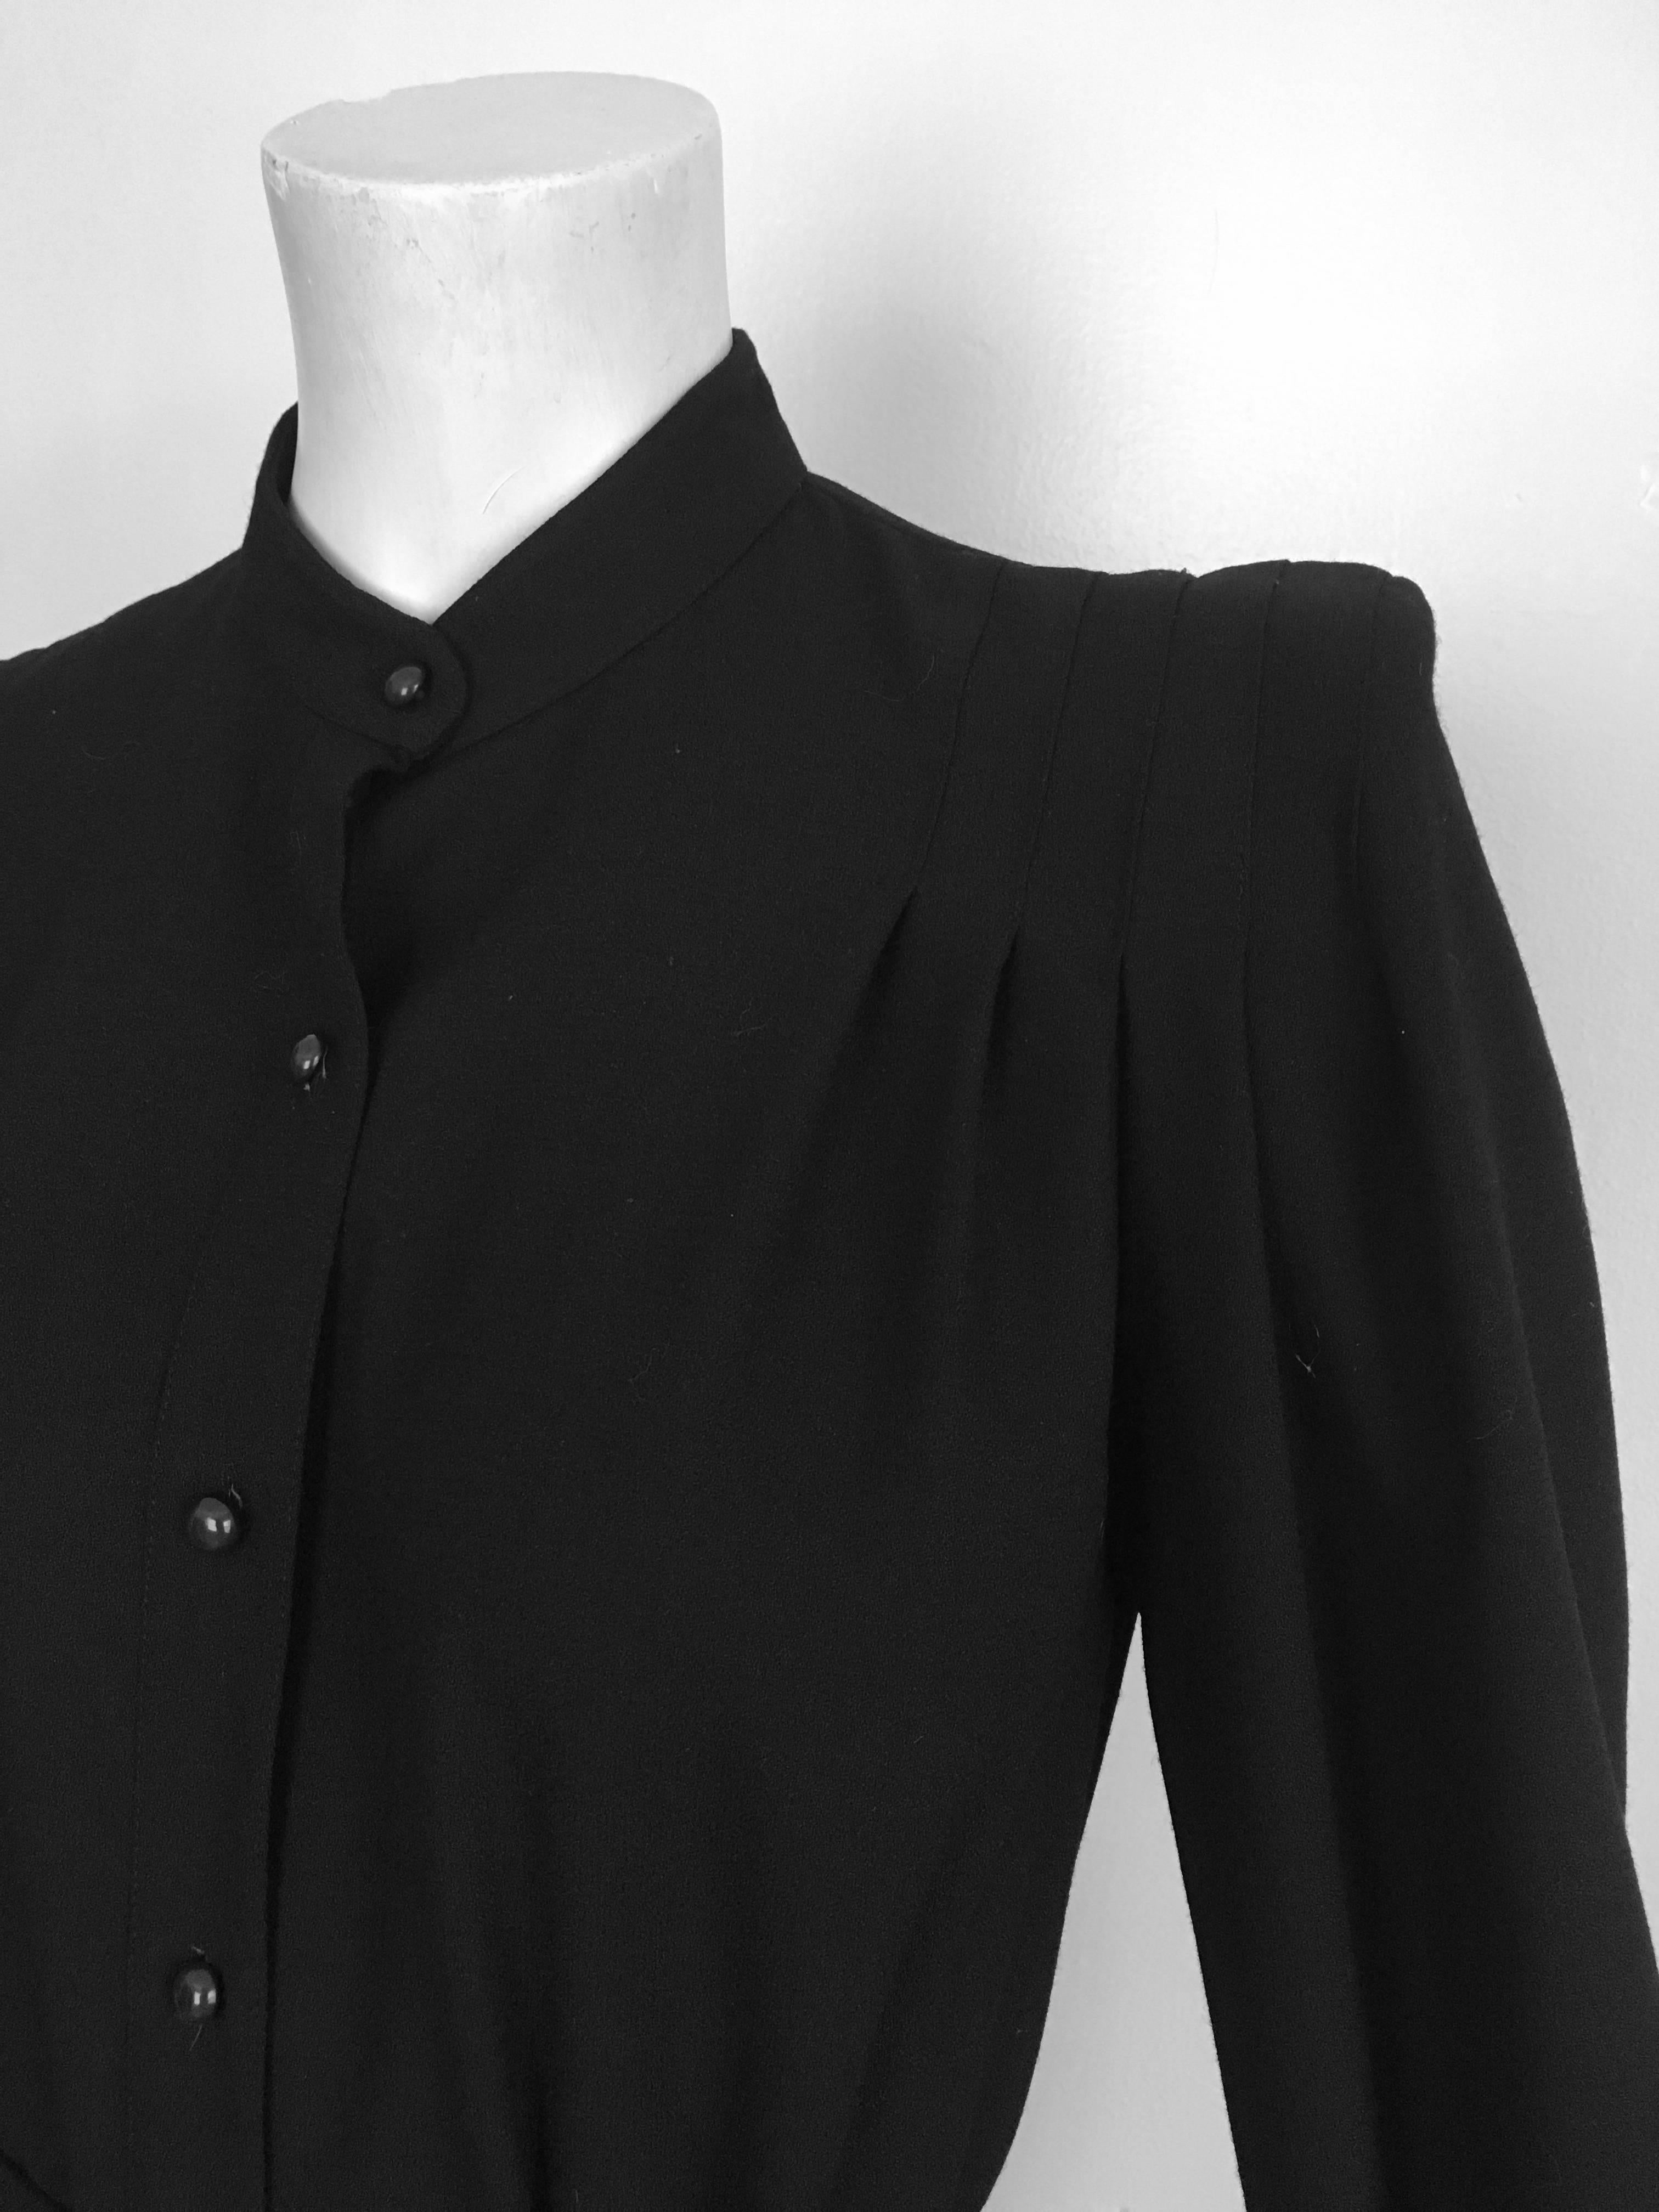 Pierre Cardin 1980s Black Wool Button Up Dress with Pockets Size 6/8. 4